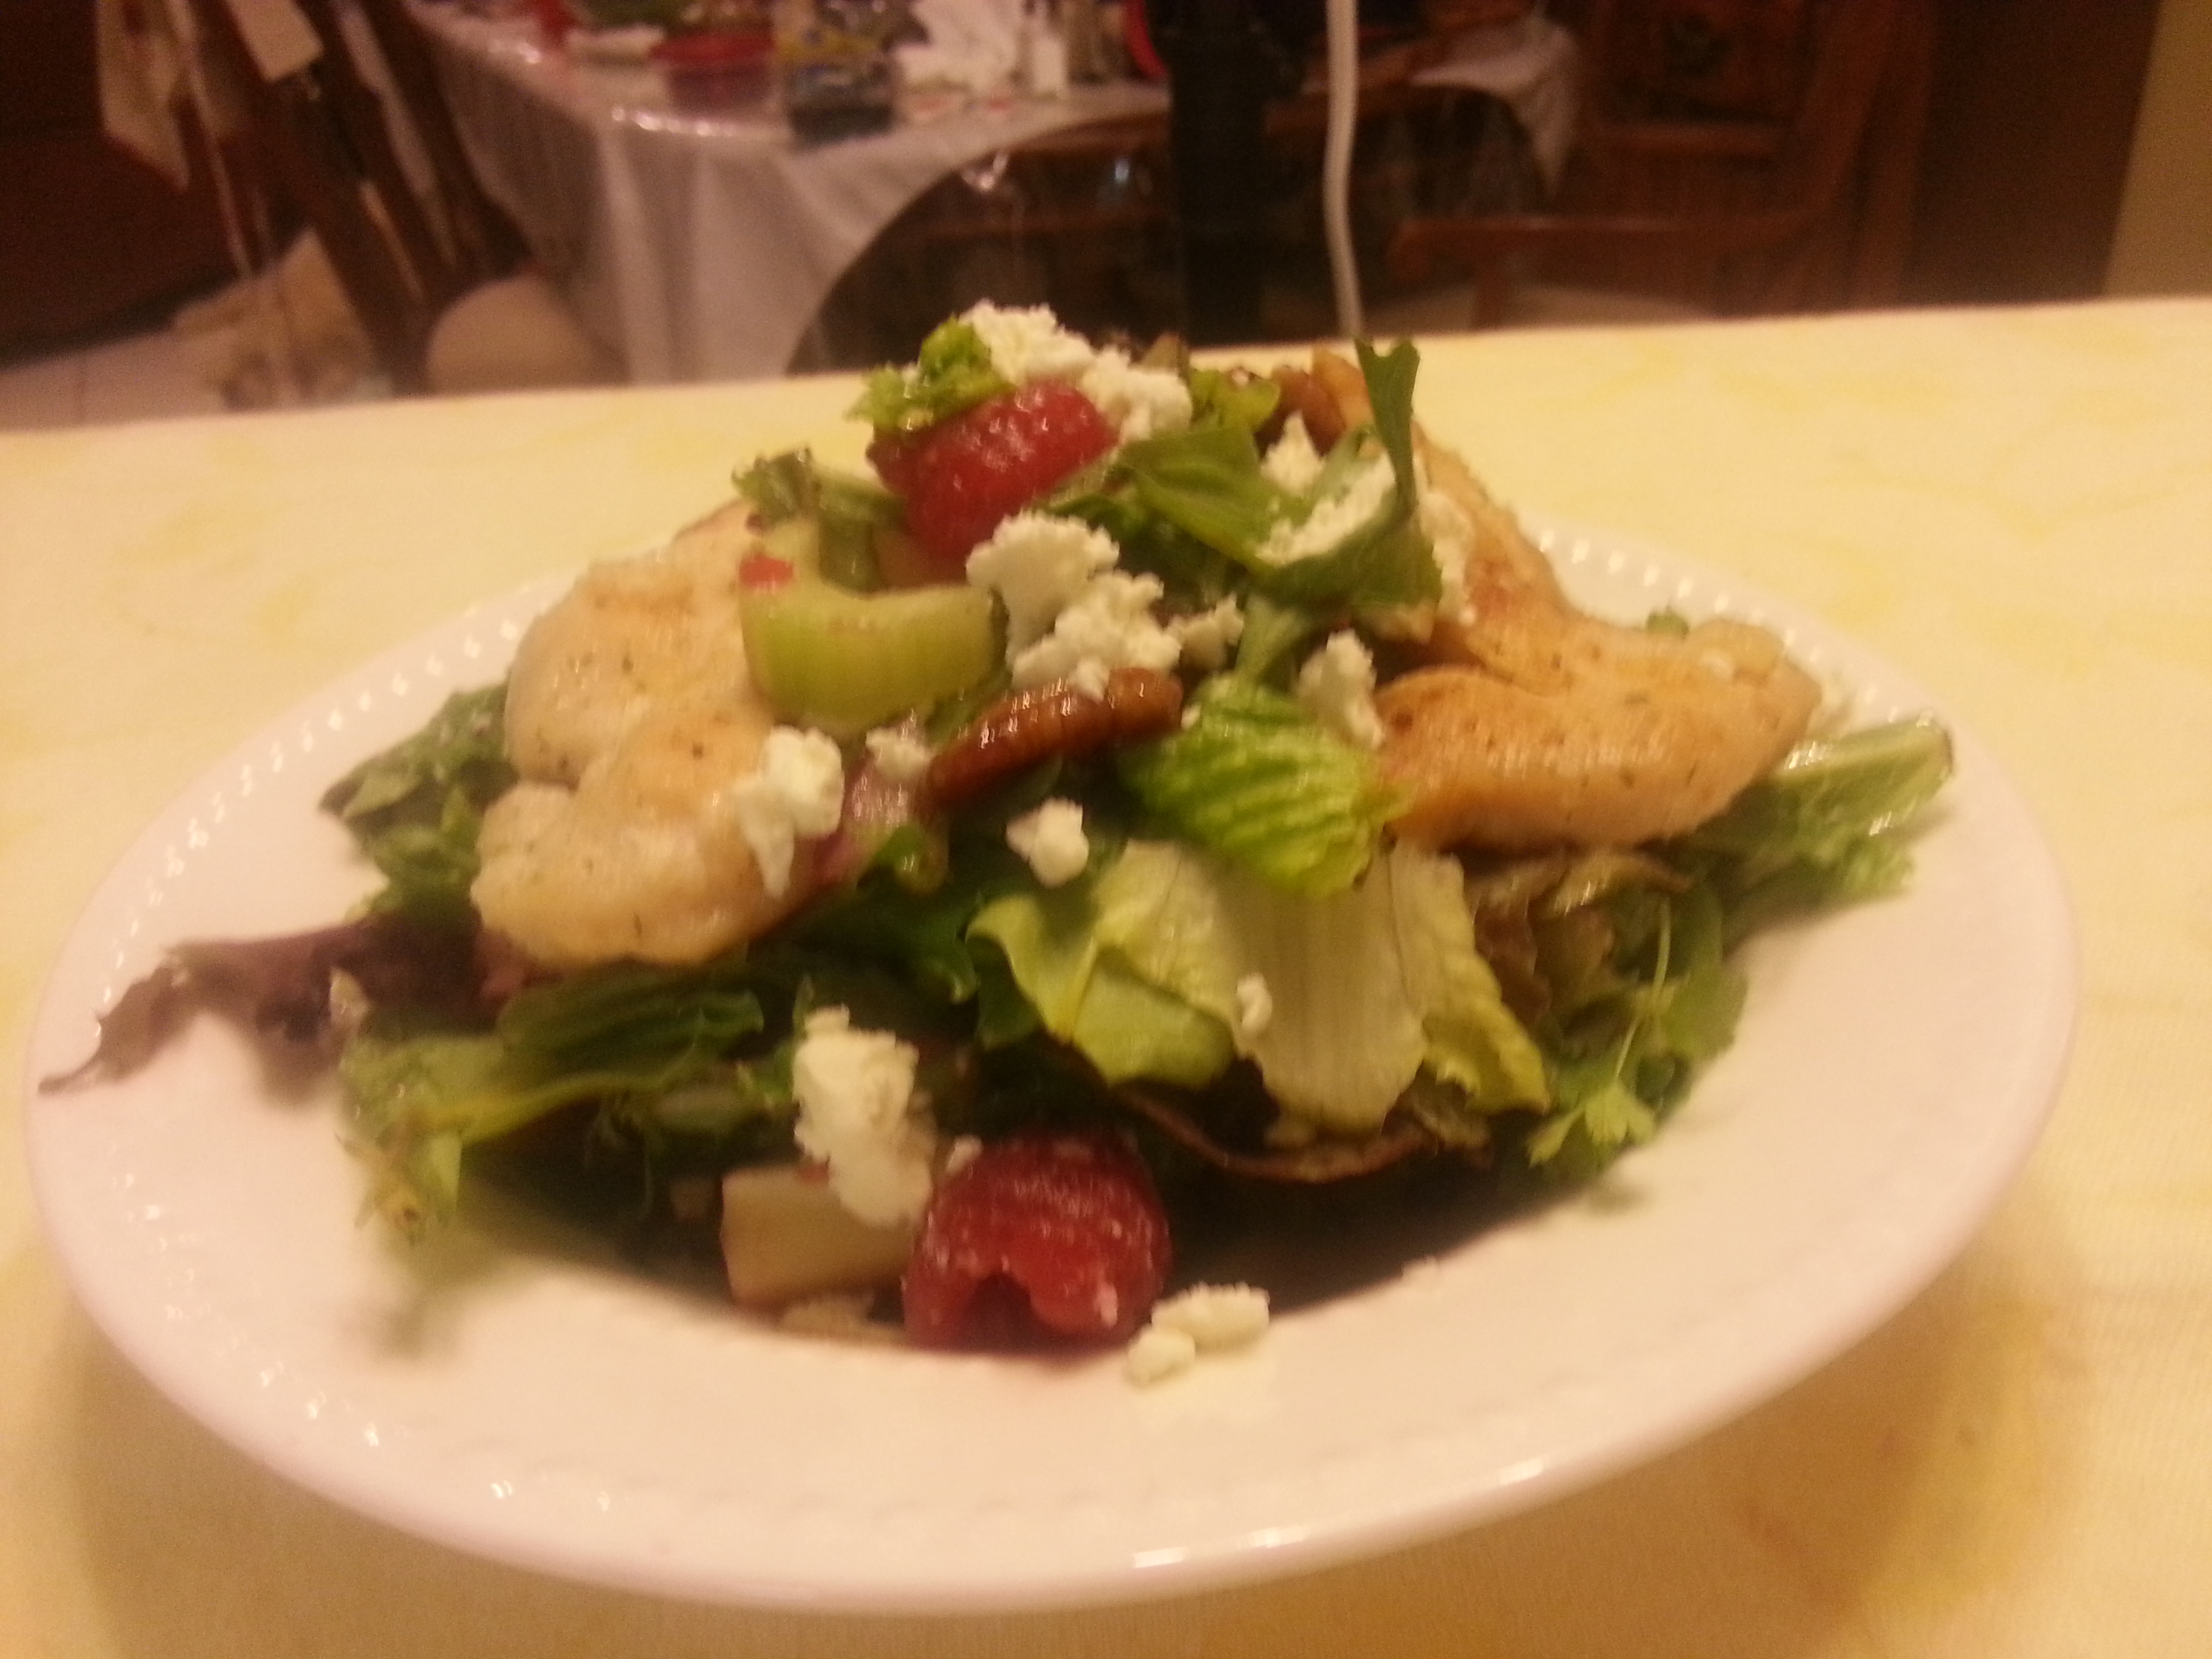 A salad with chicken, strawberries and feta cheese.